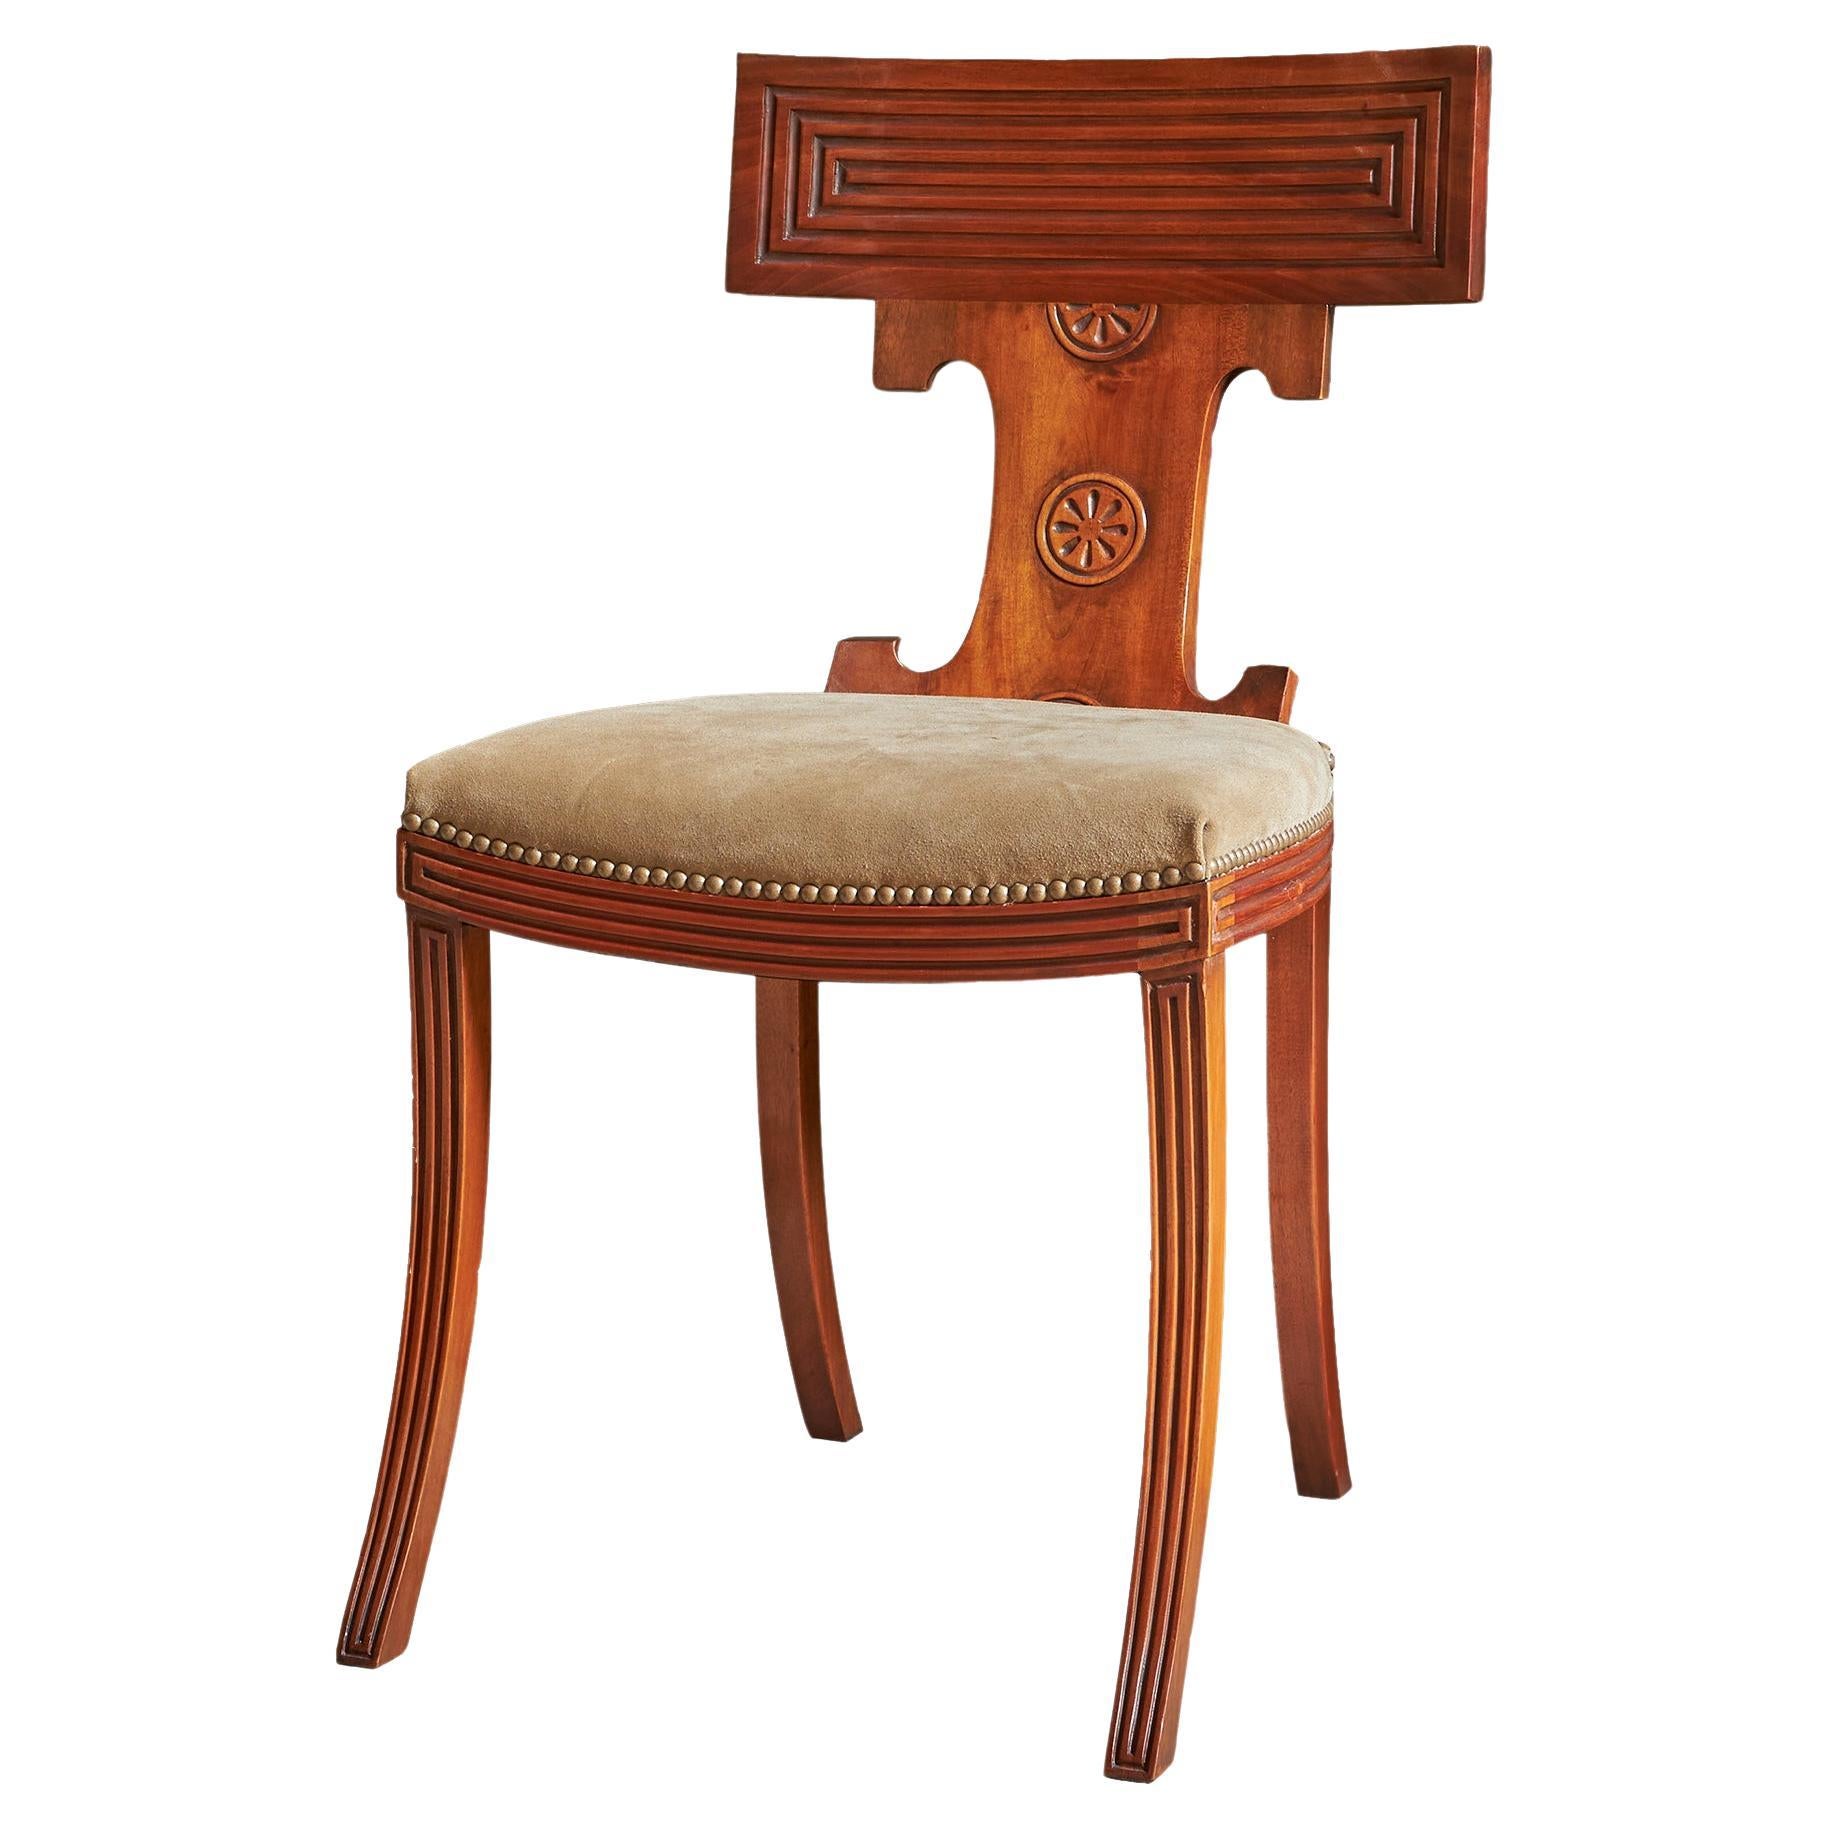 The Thomas Hope Chair For Sale